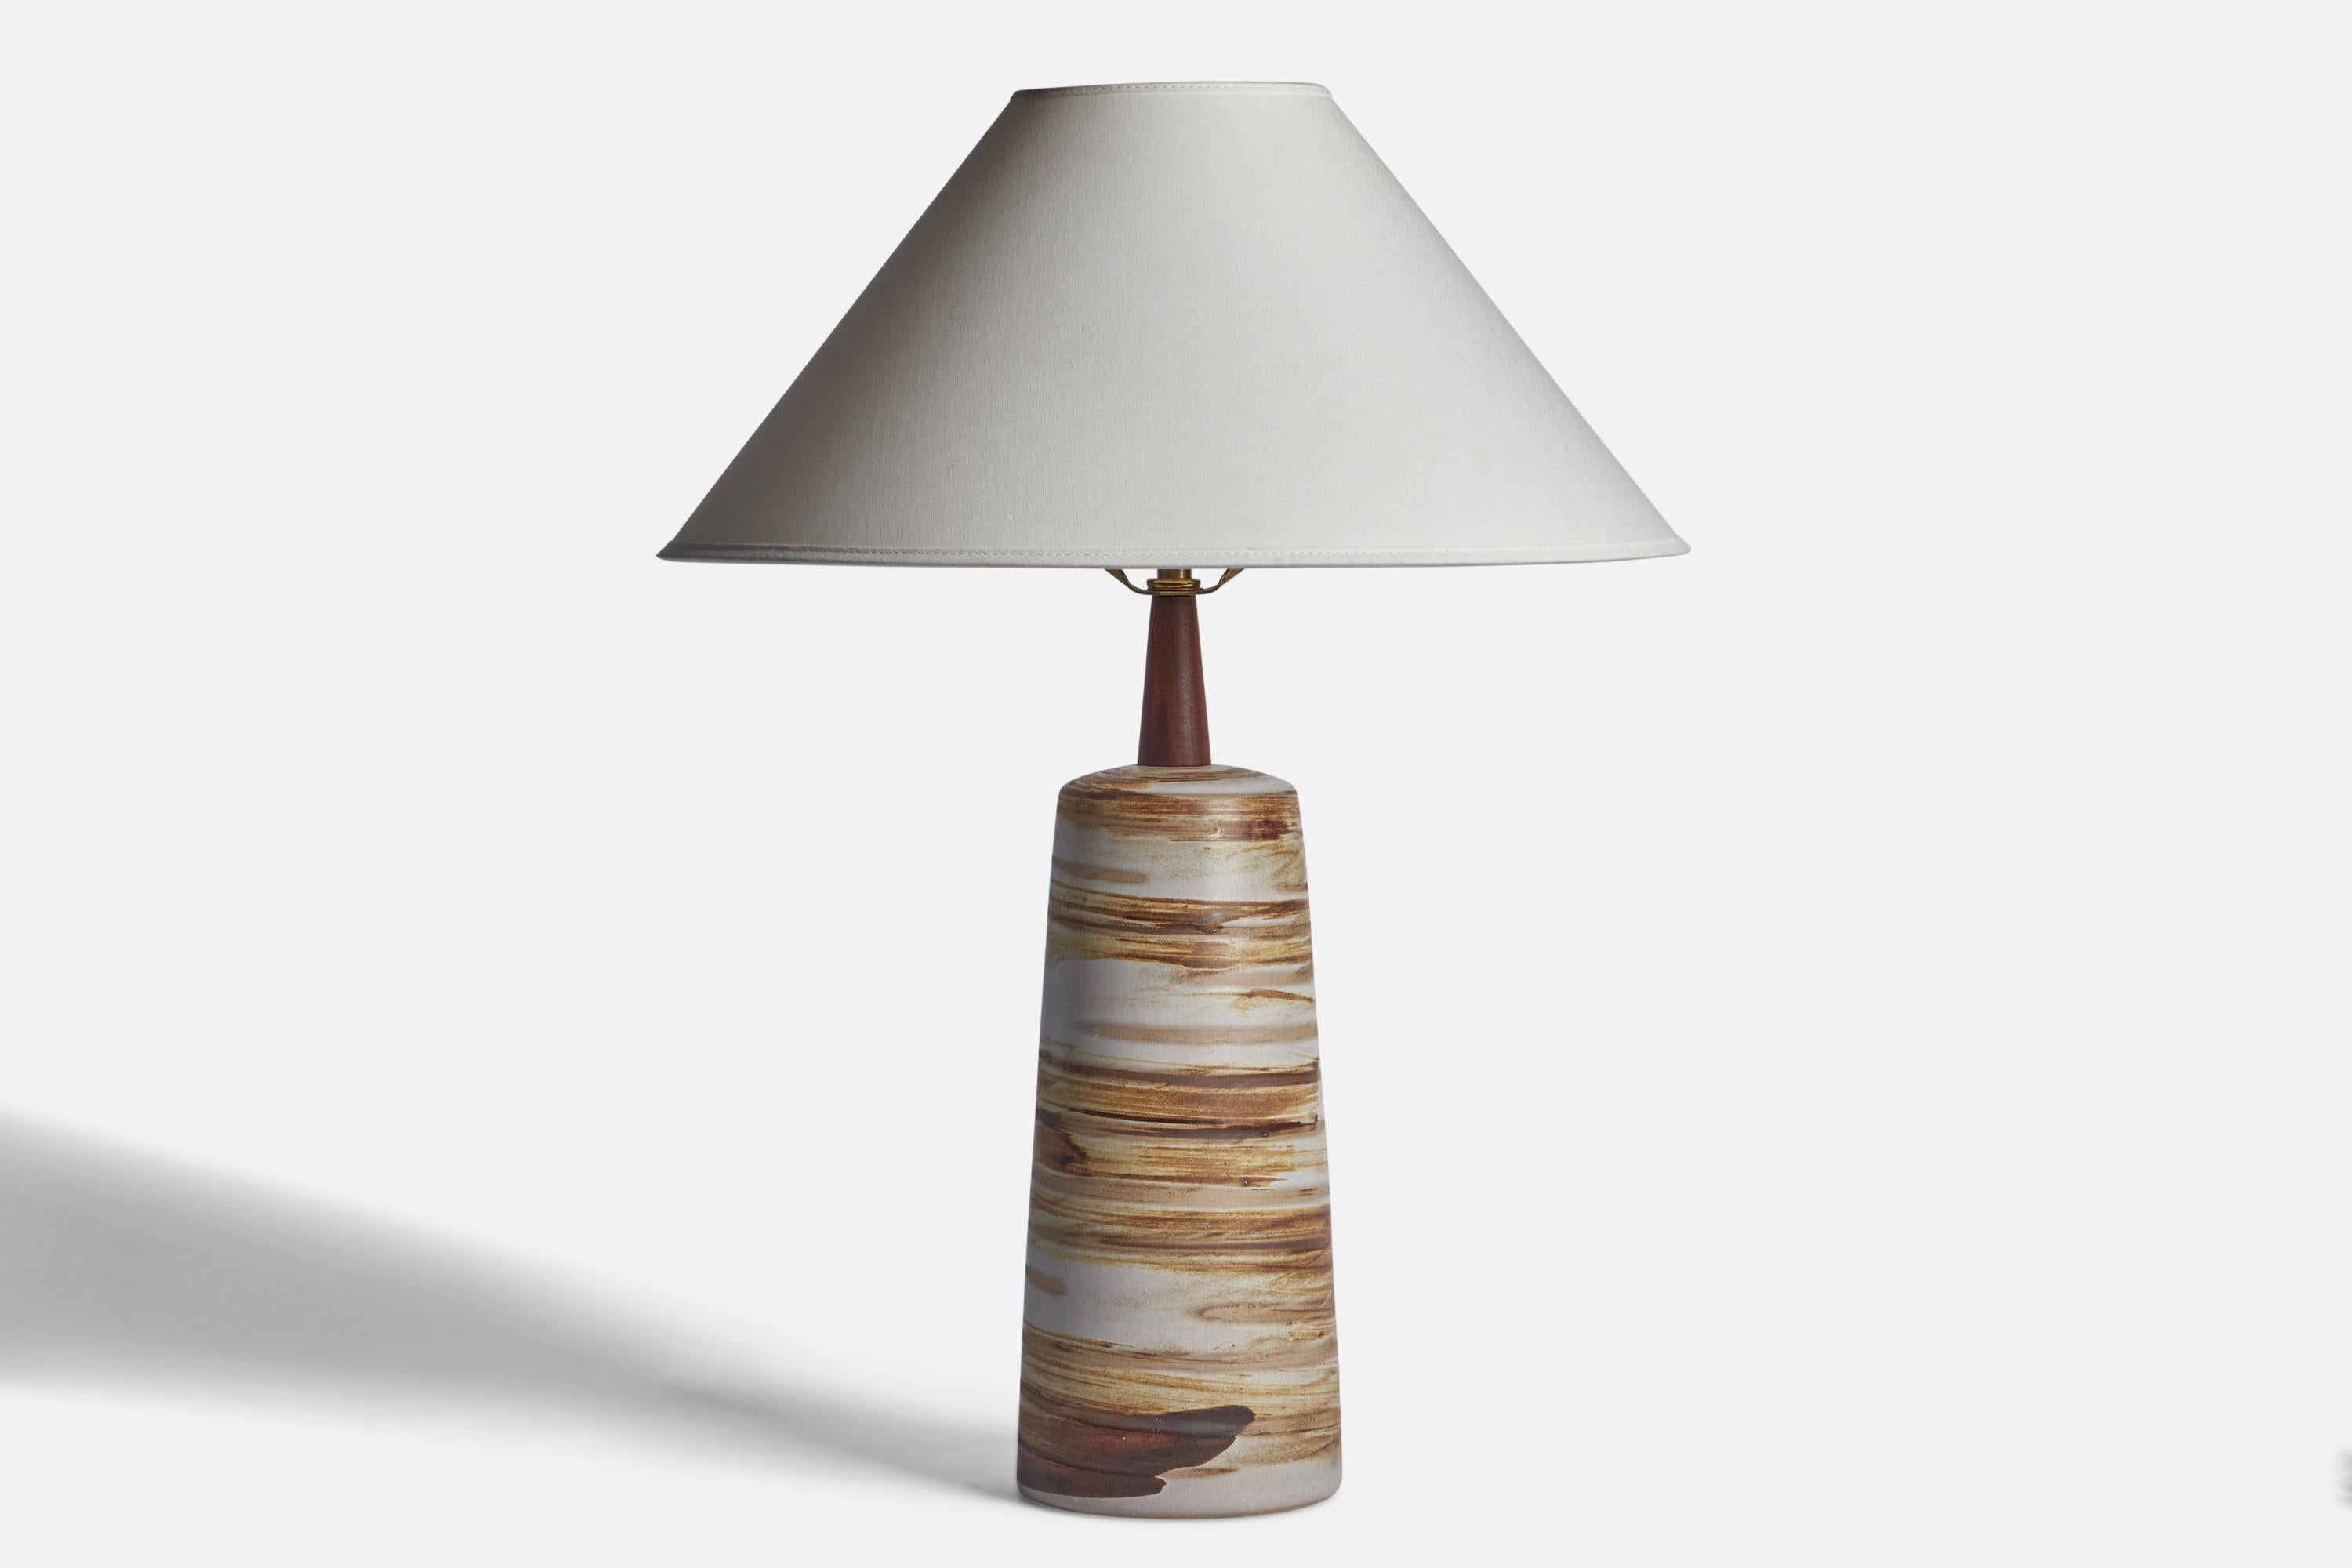 A light grey and brown-glazed ceramic and walnut table lamp designed by Jane & Gordon Martz and produced by Marshall Studios, USA, 1960s.

Dimensions of Lamp (inches): 16.95” H x 5.1” aA light grey and brown-glazed ceramic and walnut table lamp